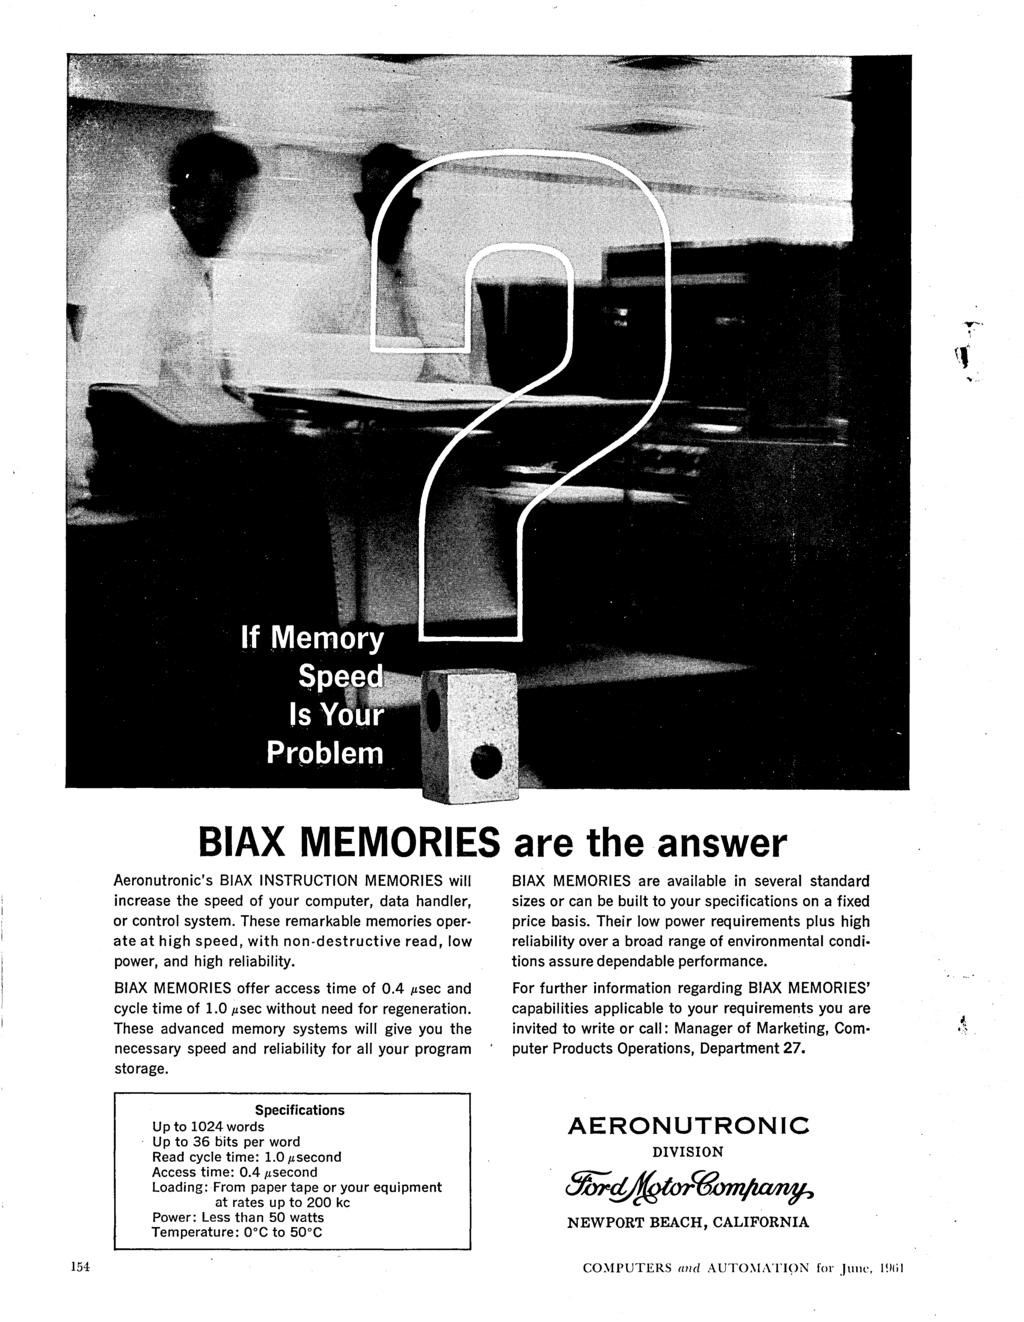 ."..... 0" I BIAX MEMORIES are the answer Aeronutronic's BIAX INSTRUCTION MEMORIES will increase the speed of your computer, data handler, or control system.